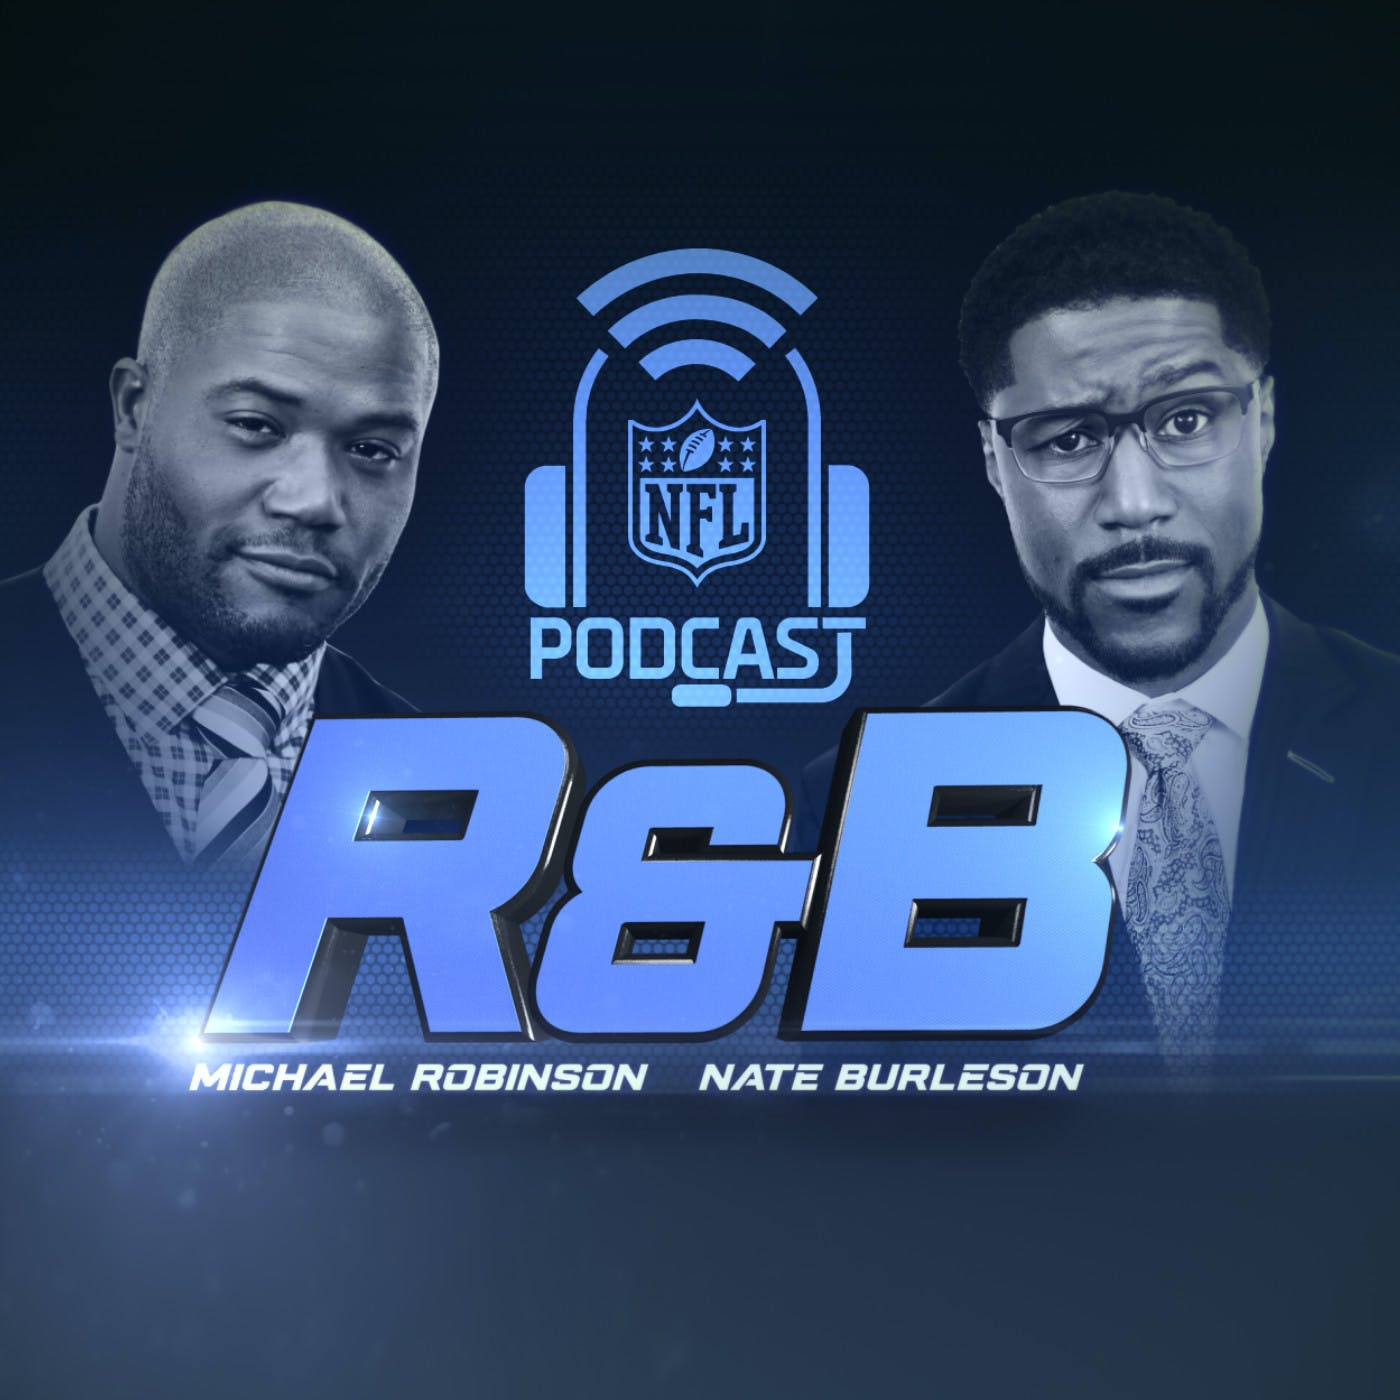 R&B: The Terrell Owens episode